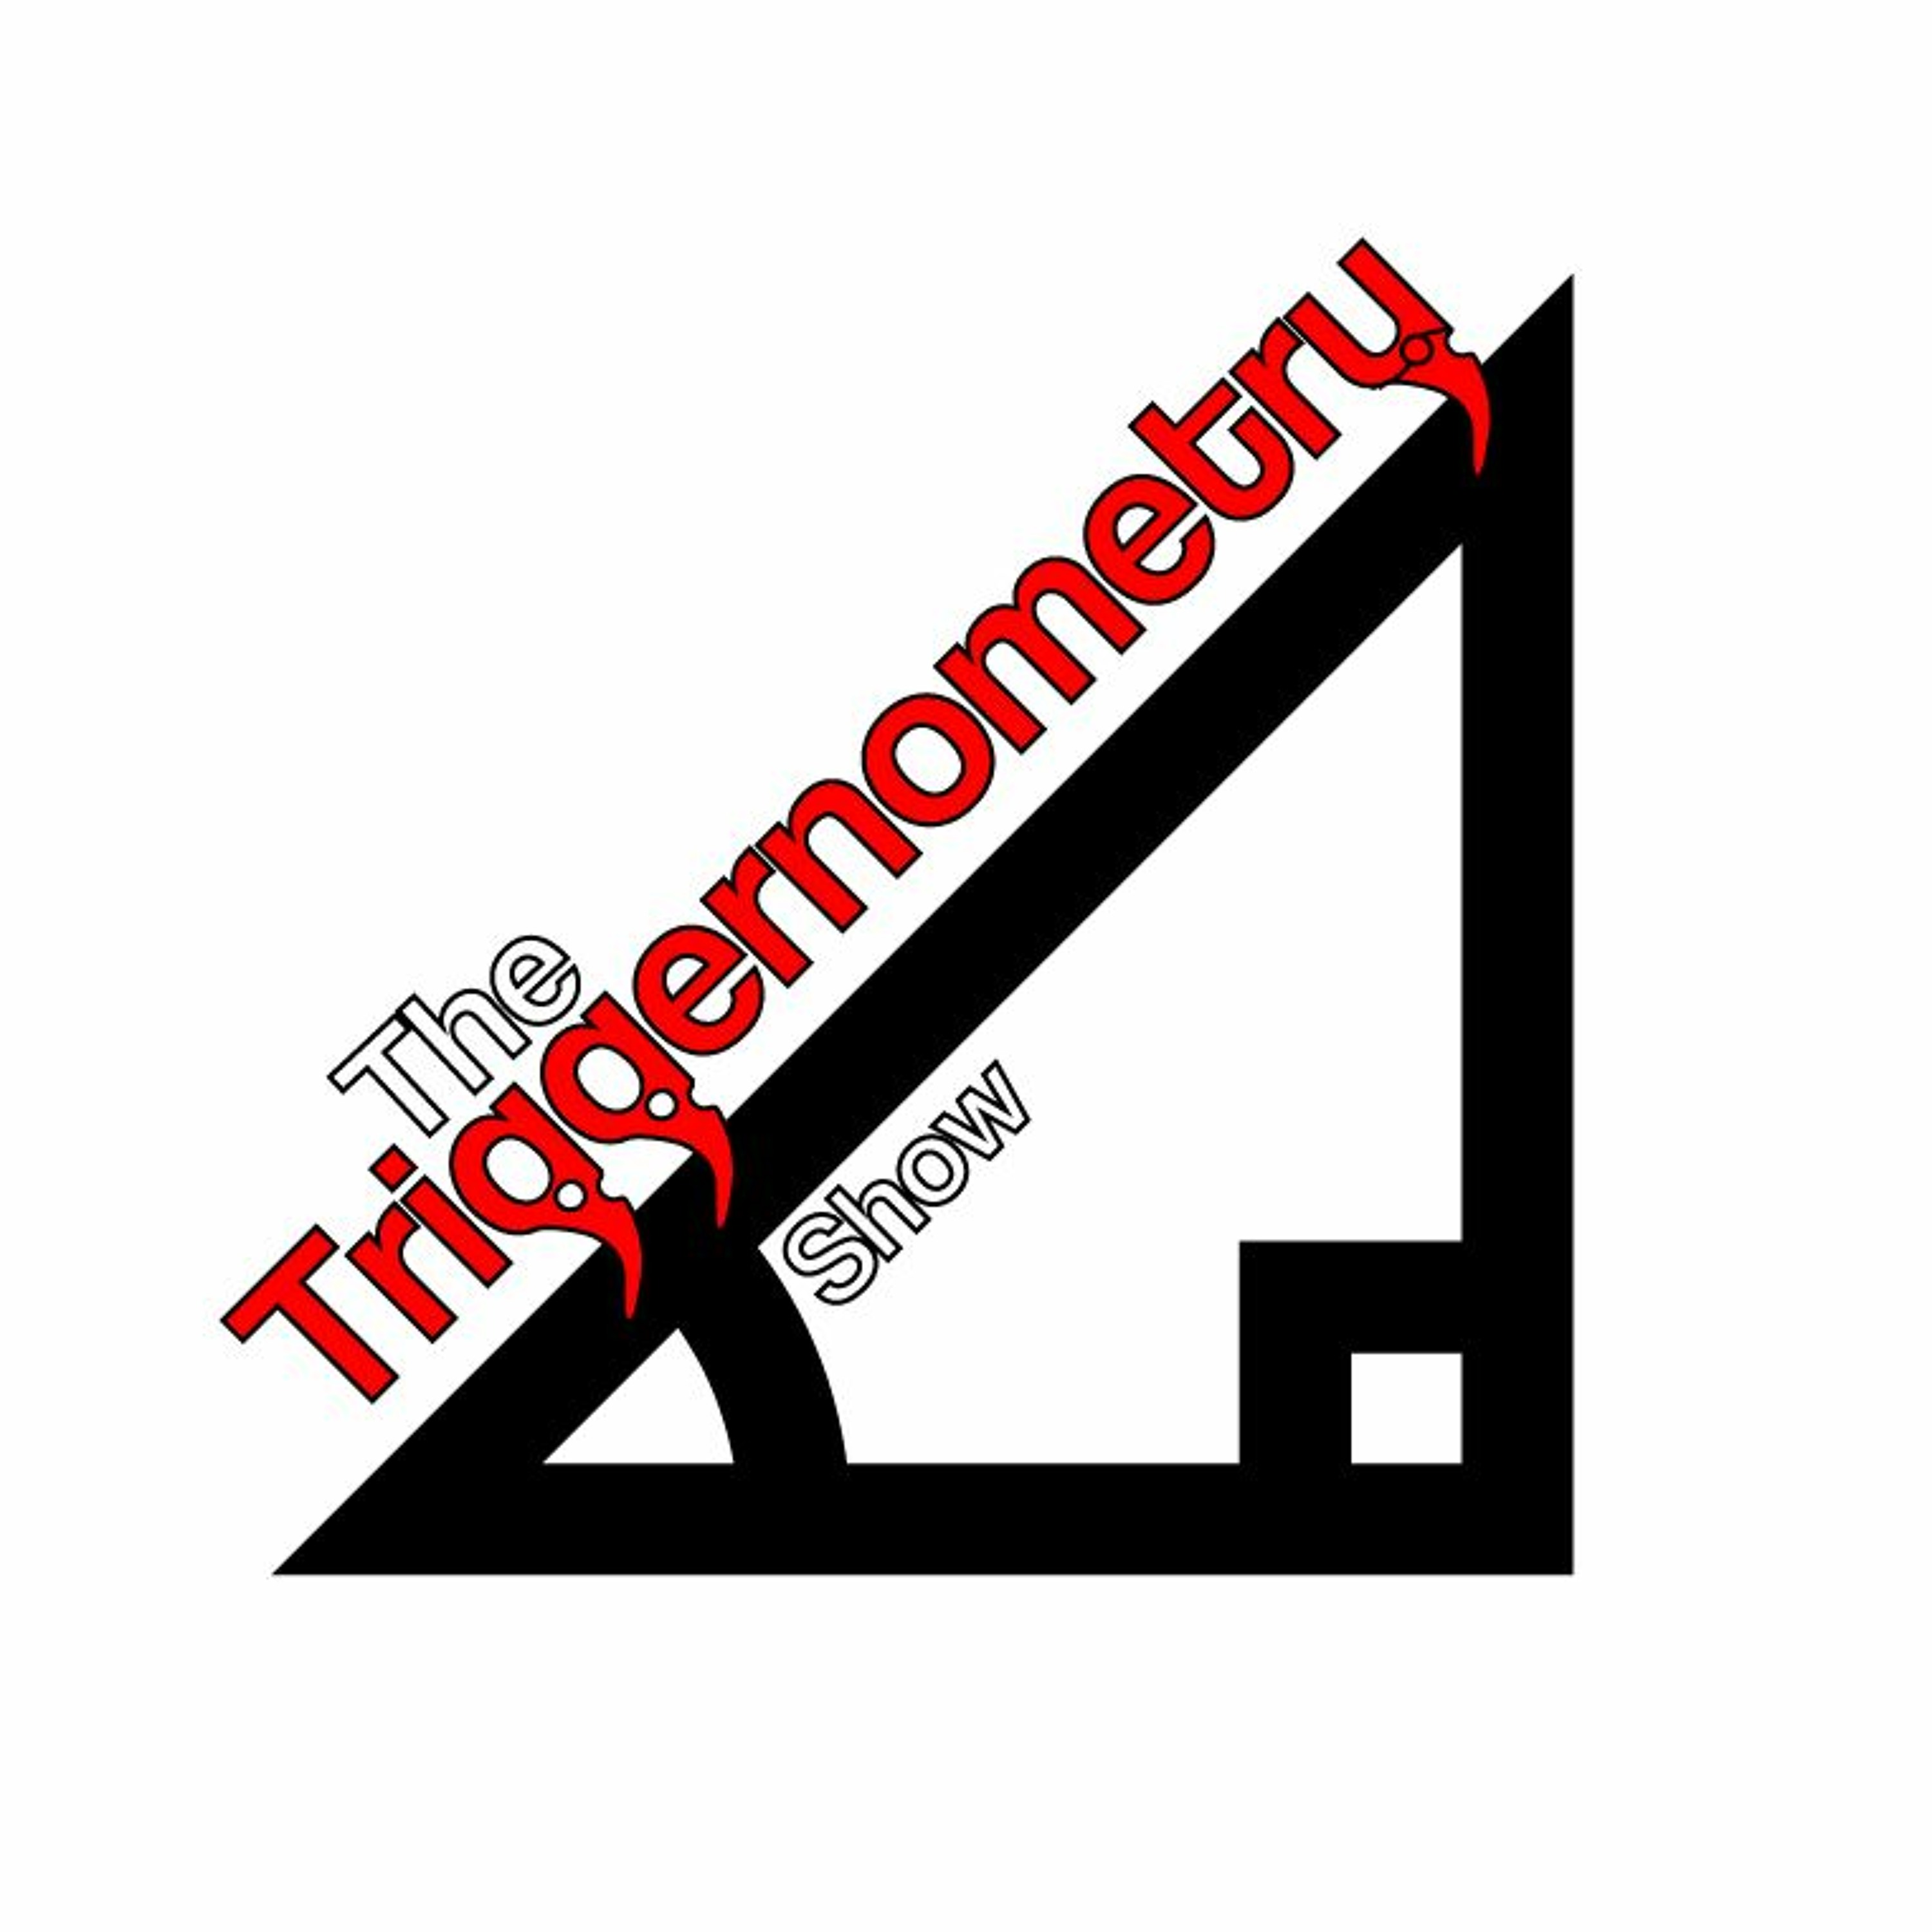 The Triggernometry Show - Dan Hardy - history and innovation